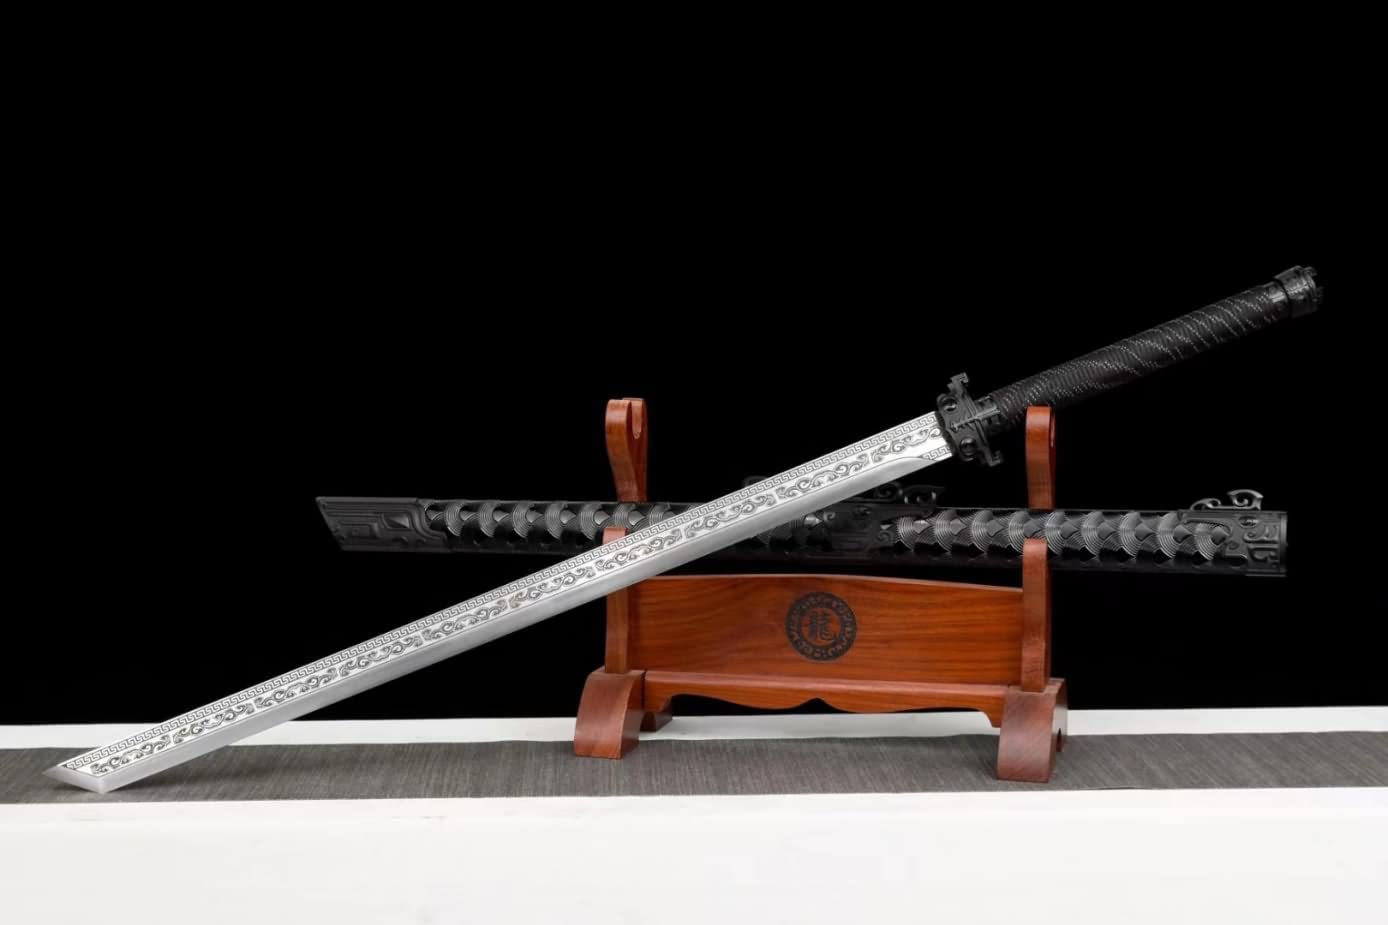 Ancient Chinese Sword Real, high Carbon Steel Blades,Alloy Fittings,CHINESE SWORD